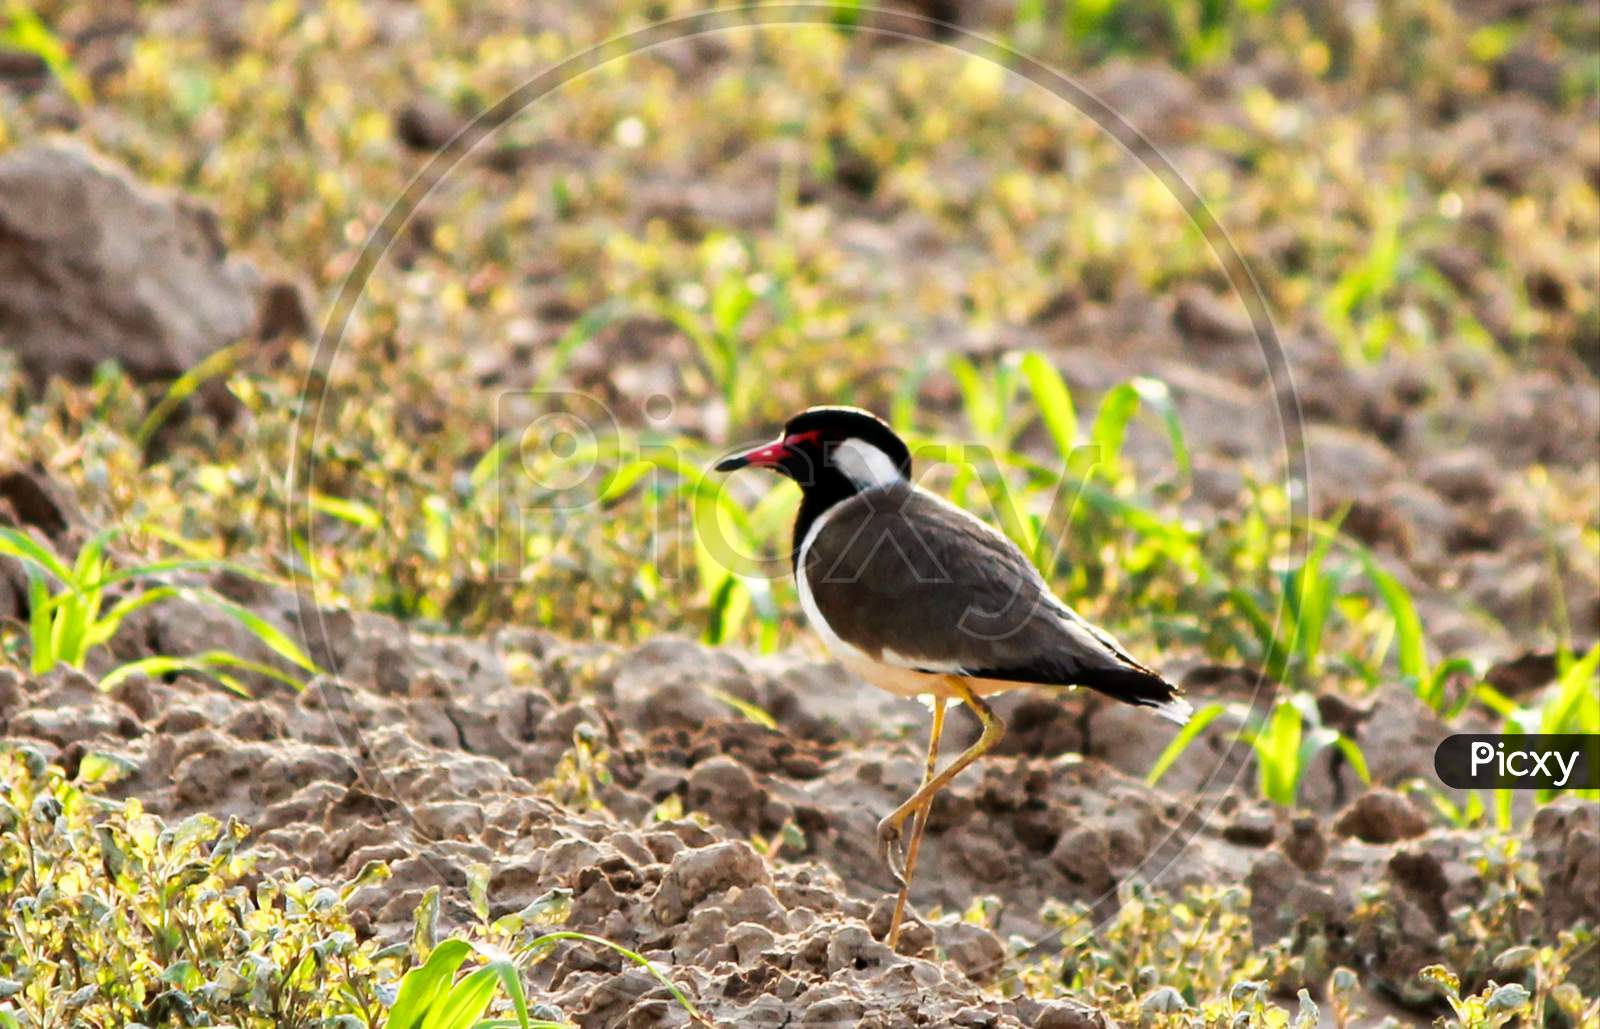 The red-wattled lapwing Protecting her eggs on the ground